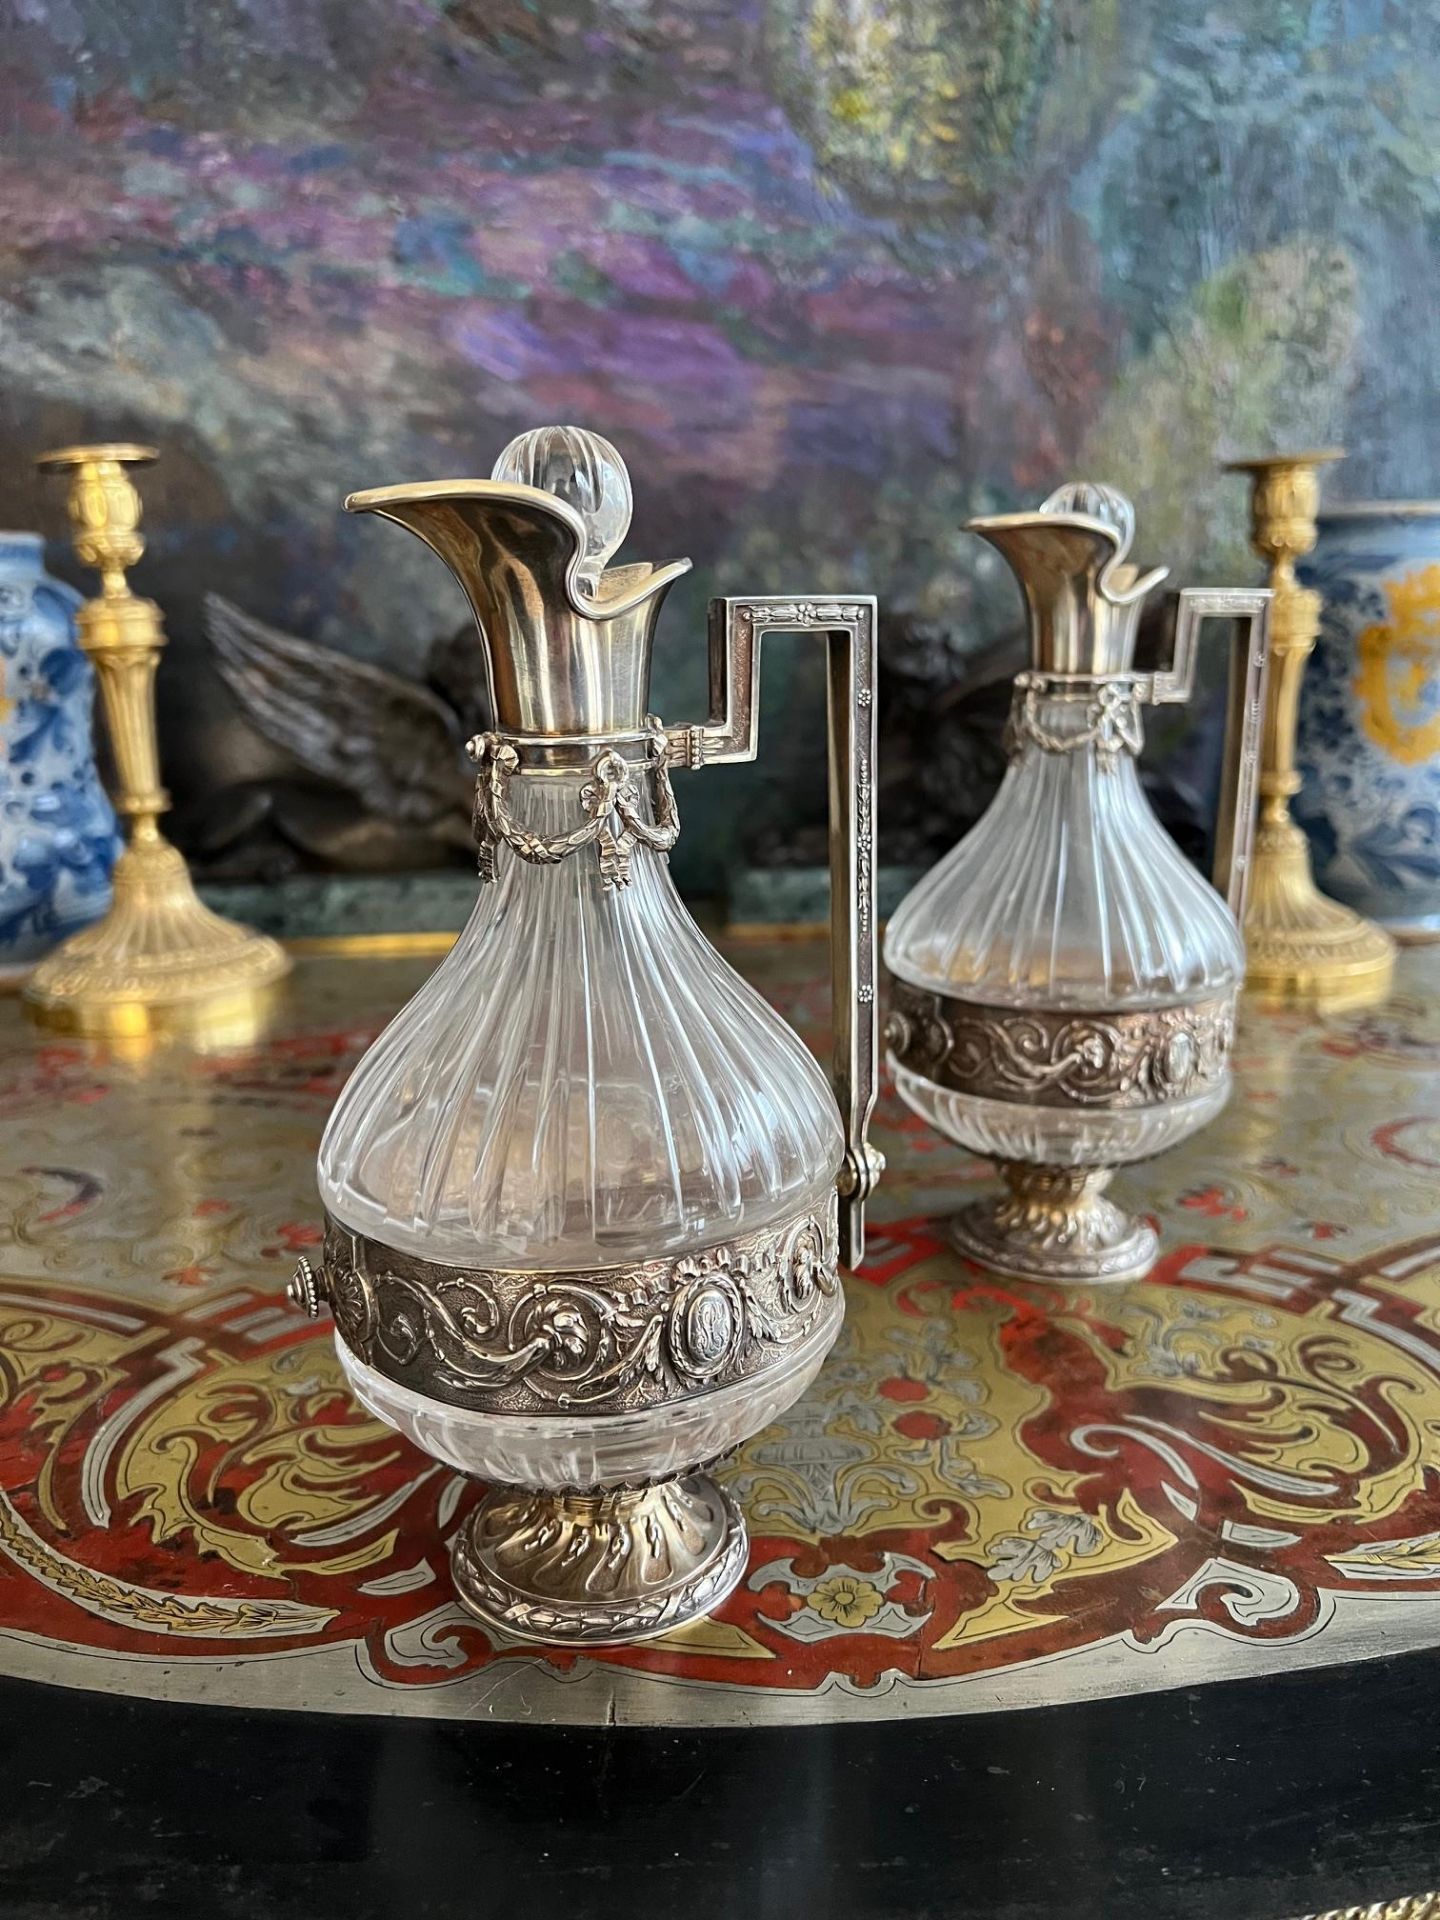 A PAIR OF 19TH CENTURY FRENCH SILVER AND GLASS LIQUOR JUGS - Image 5 of 7